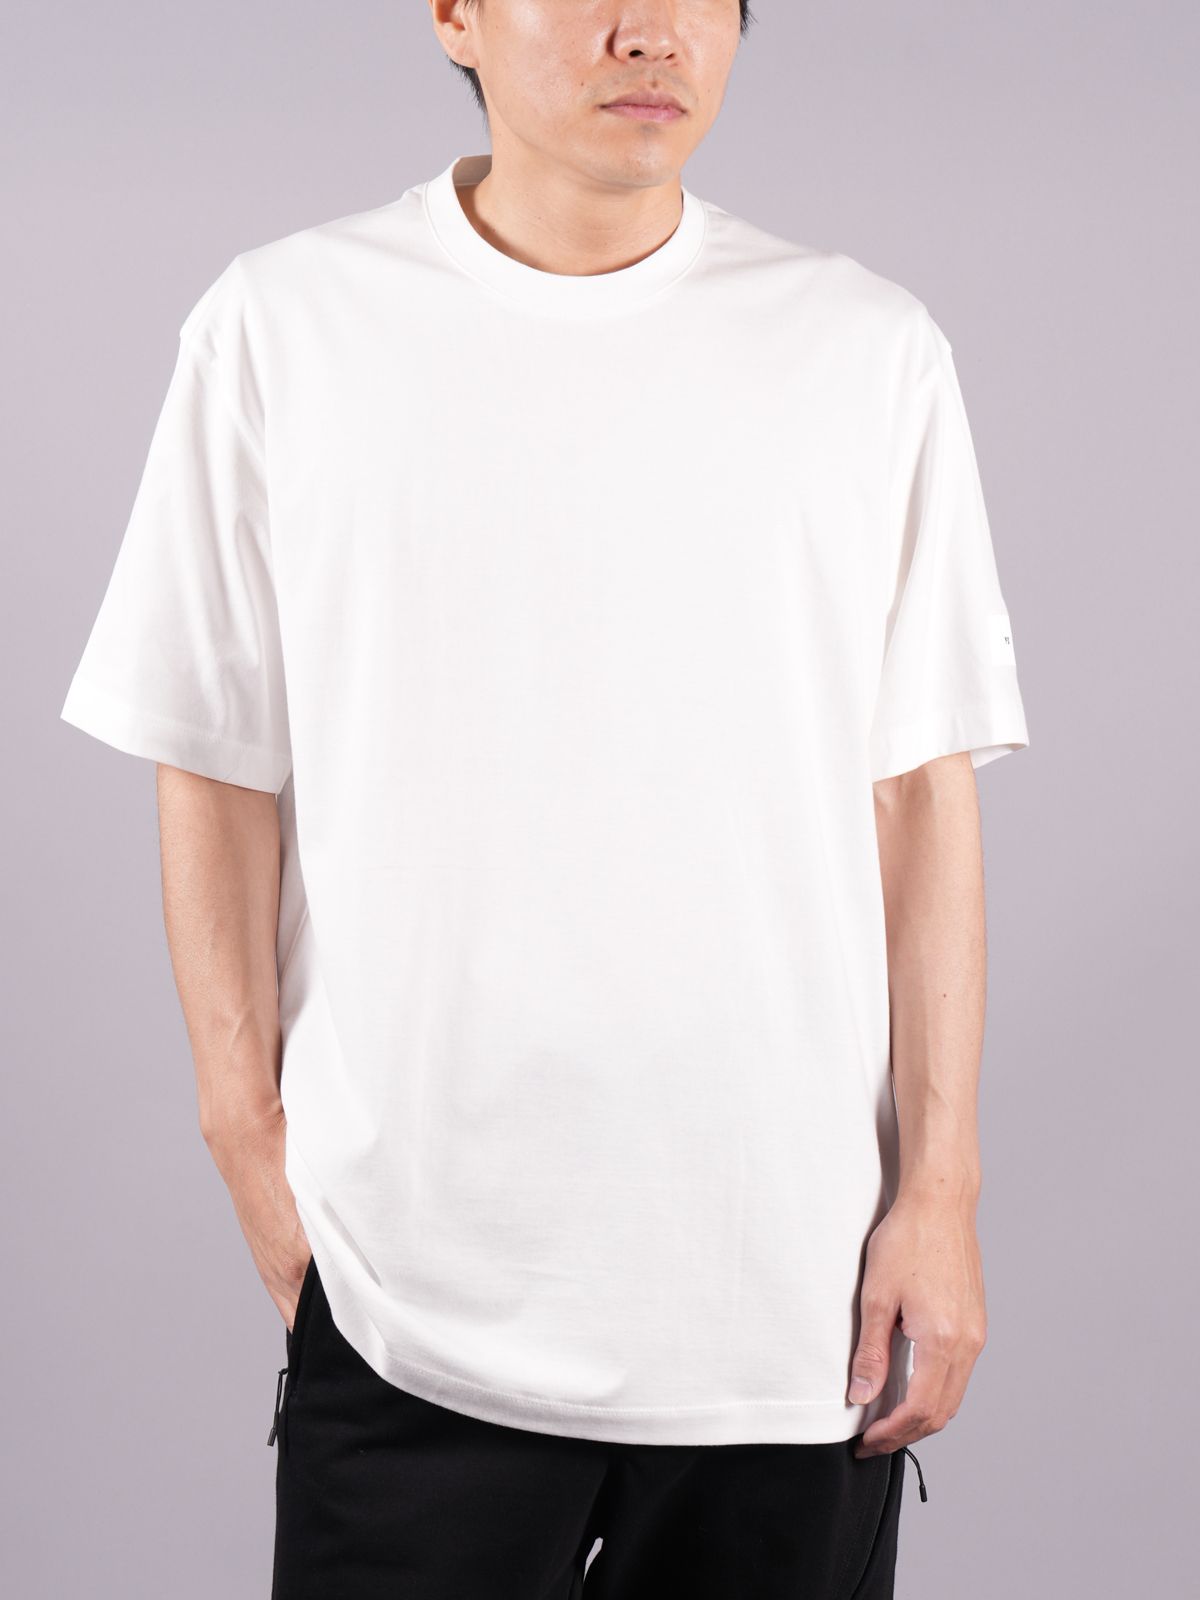 Y-3 - 【定番商品】 RELAXED SS TEE / Tシャツ 【ルーズフィット 